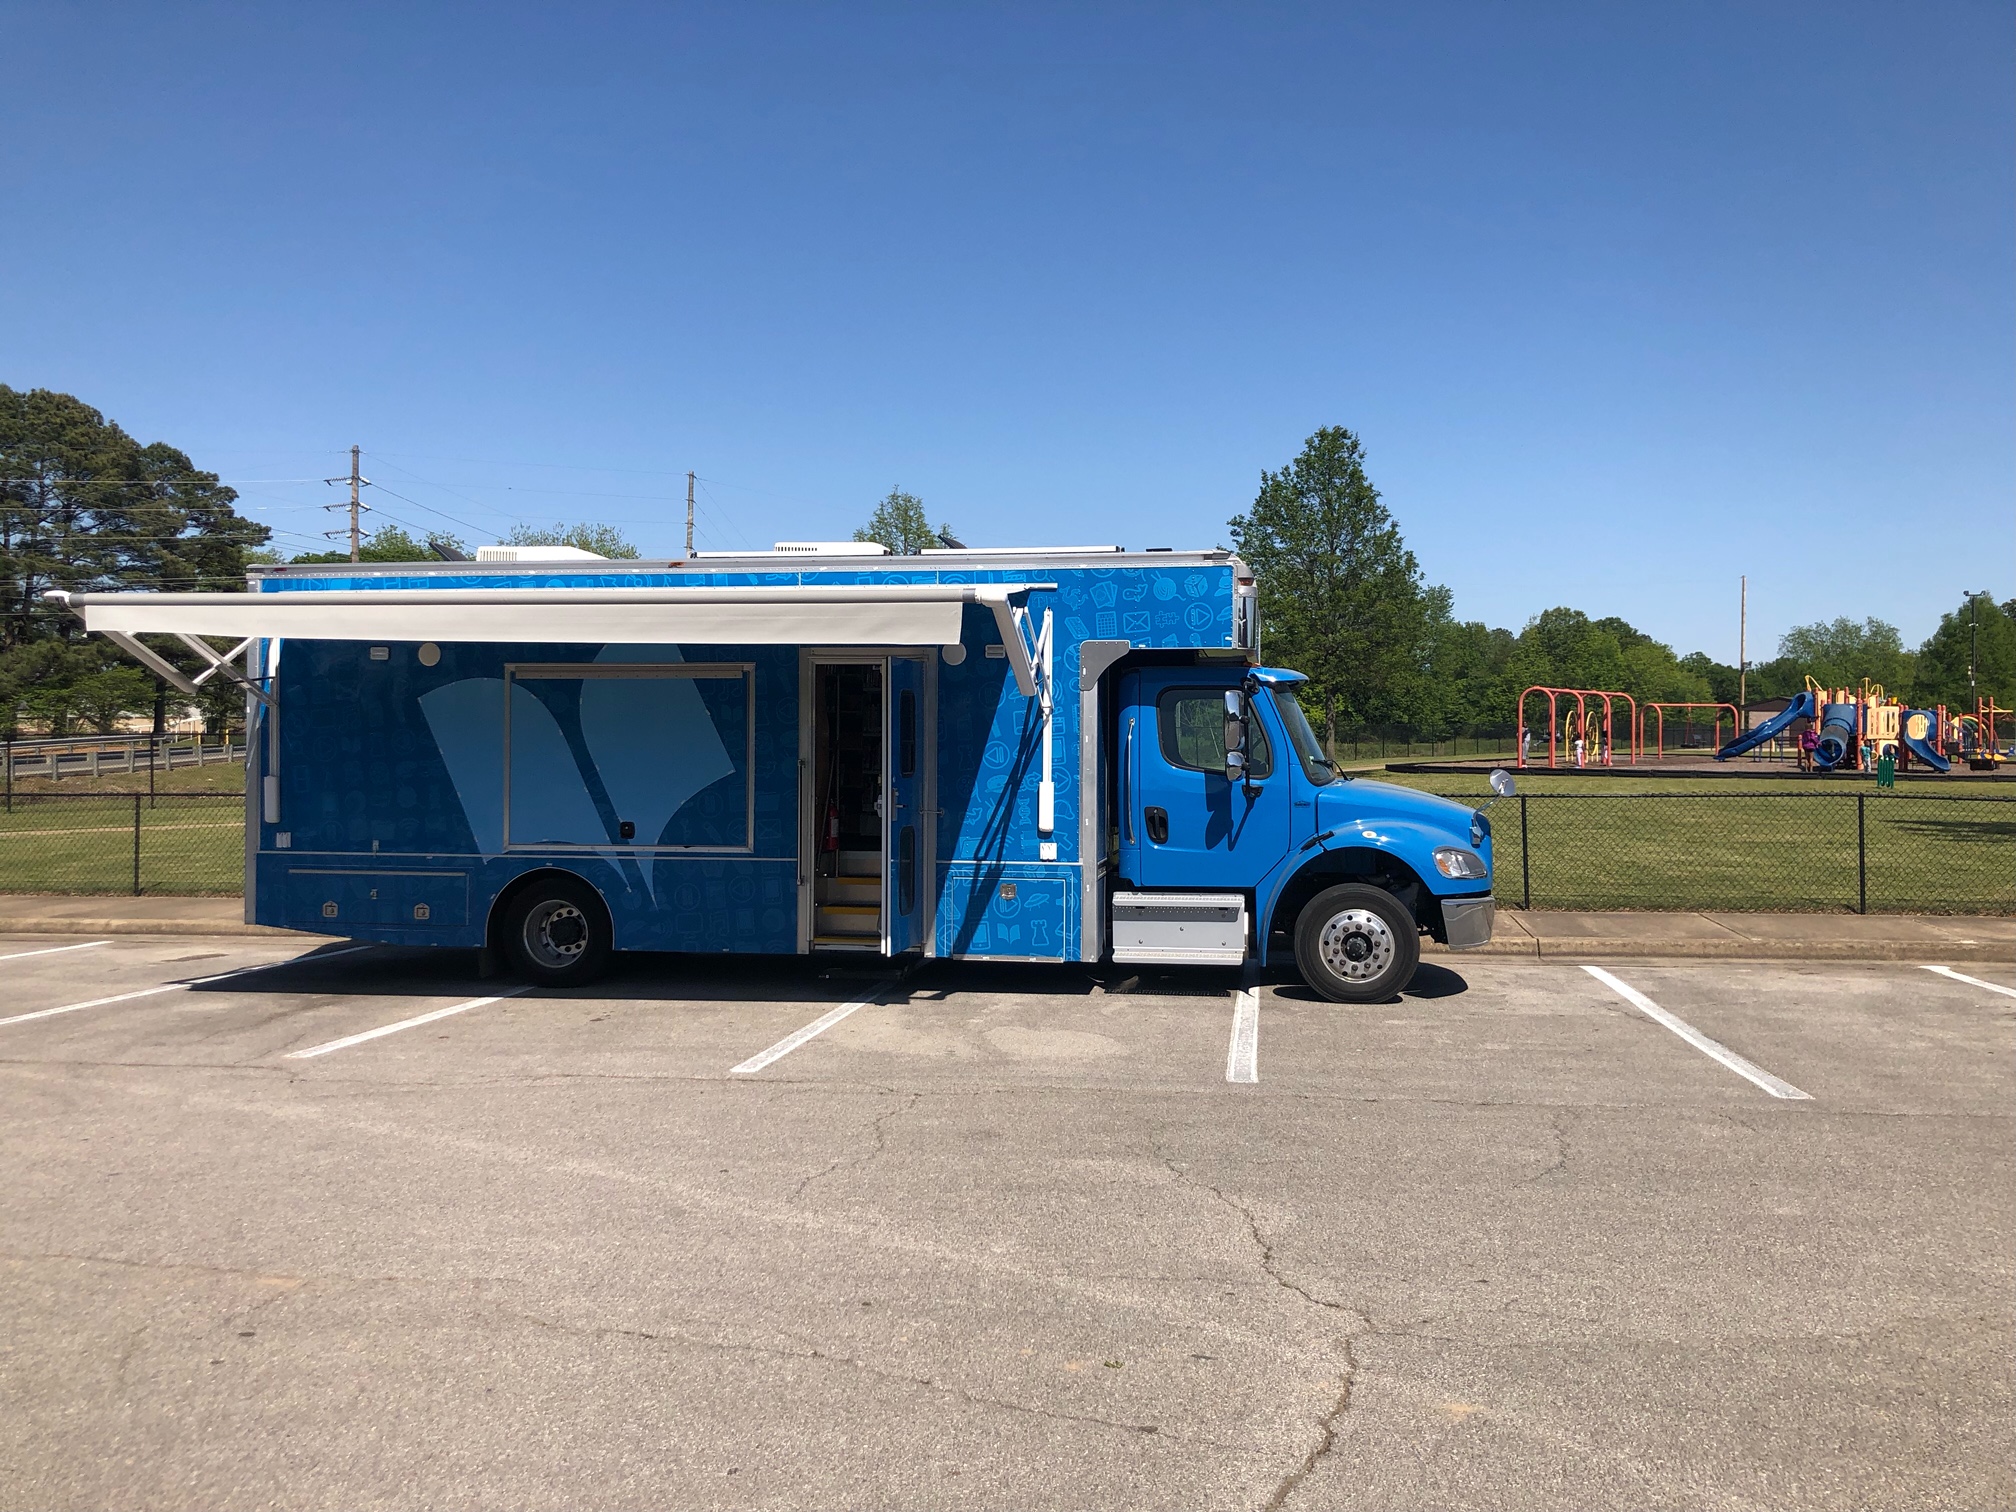 An image of the Bookmobile, a large blue mobile library bus, in a parking lot with its awning extended